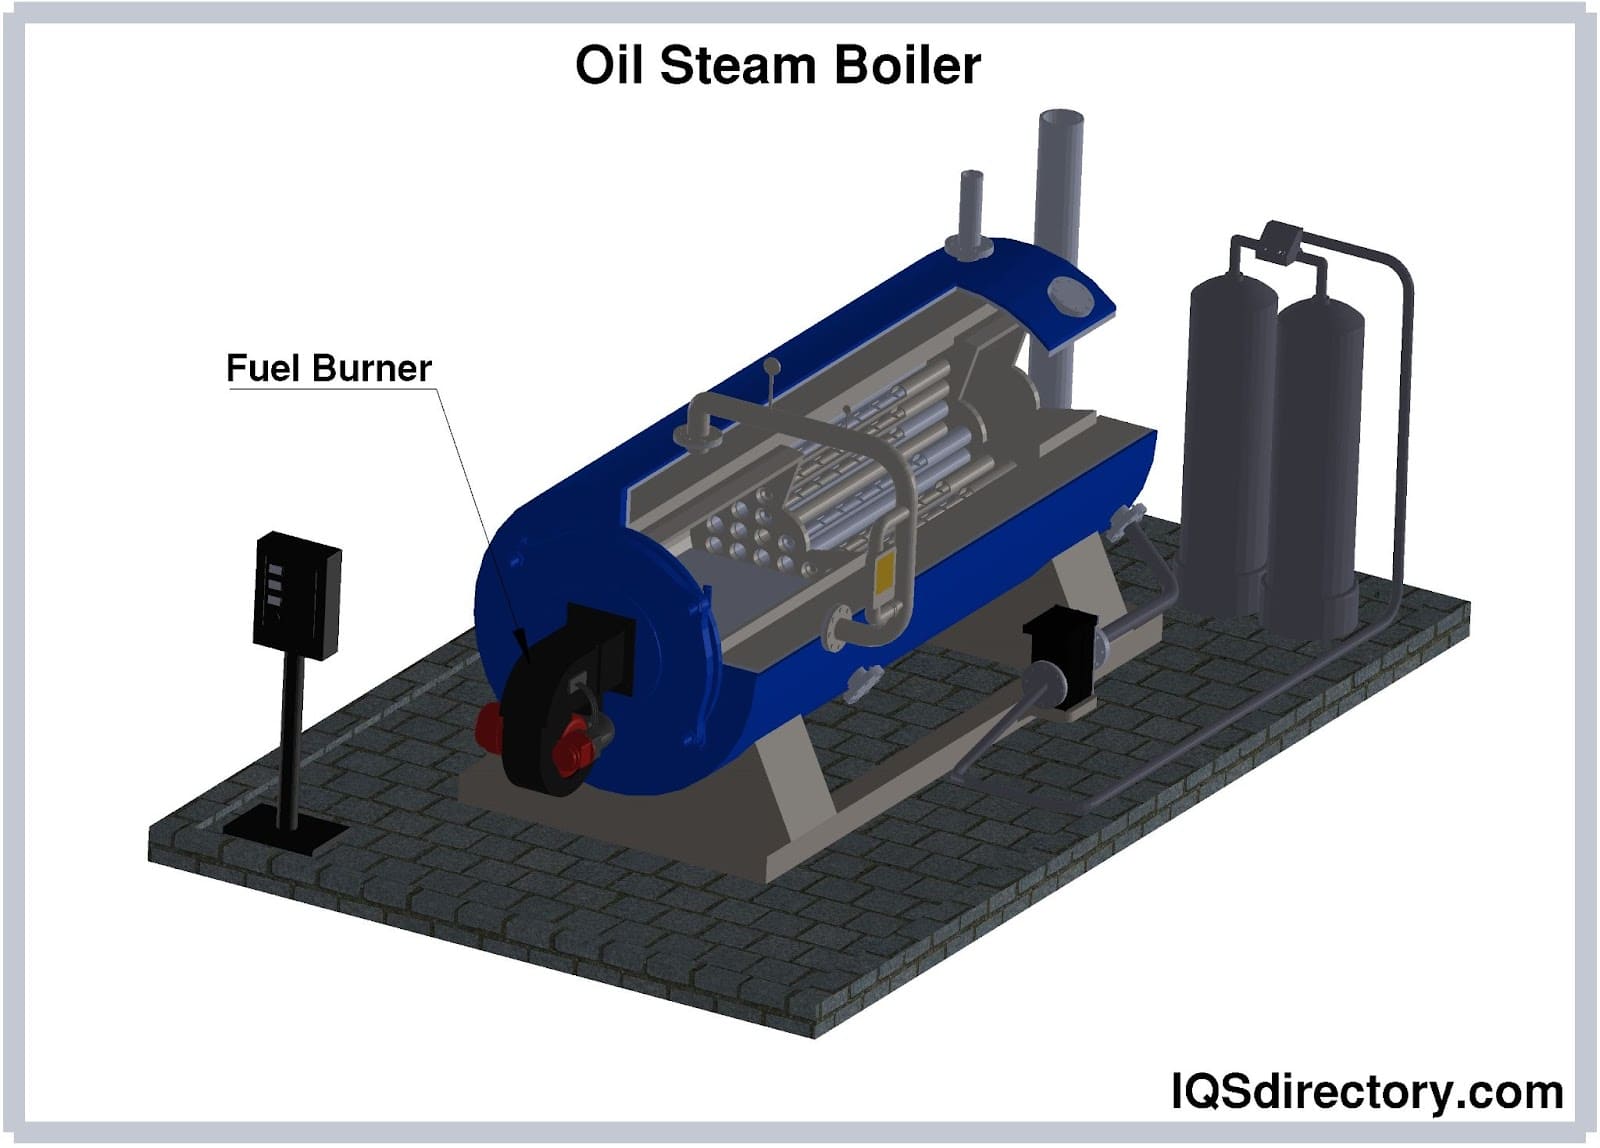 A part of the steam boiler that burns fuel is the (120) фото